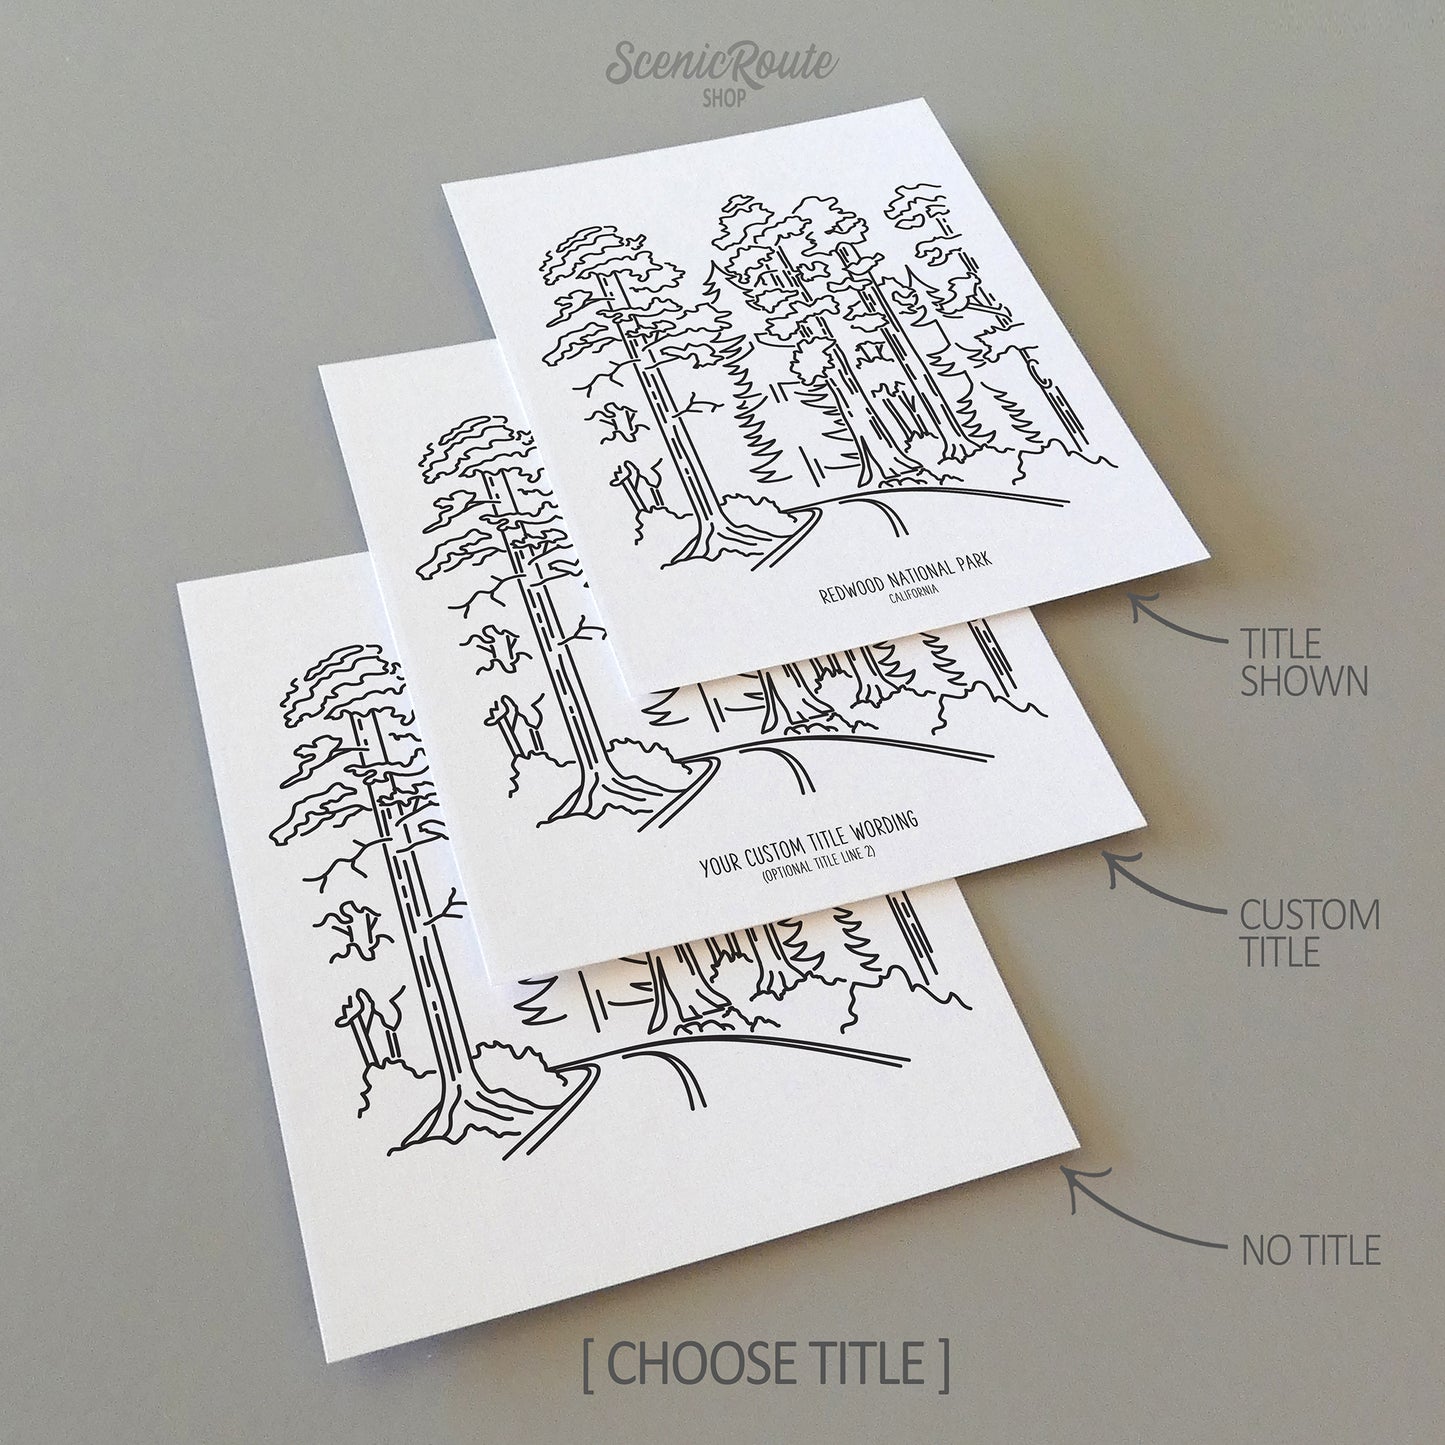 Three line art drawings of Redwood National Park on white linen paper with a gray background. The pieces are shown with title options that can be chosen and personalized.